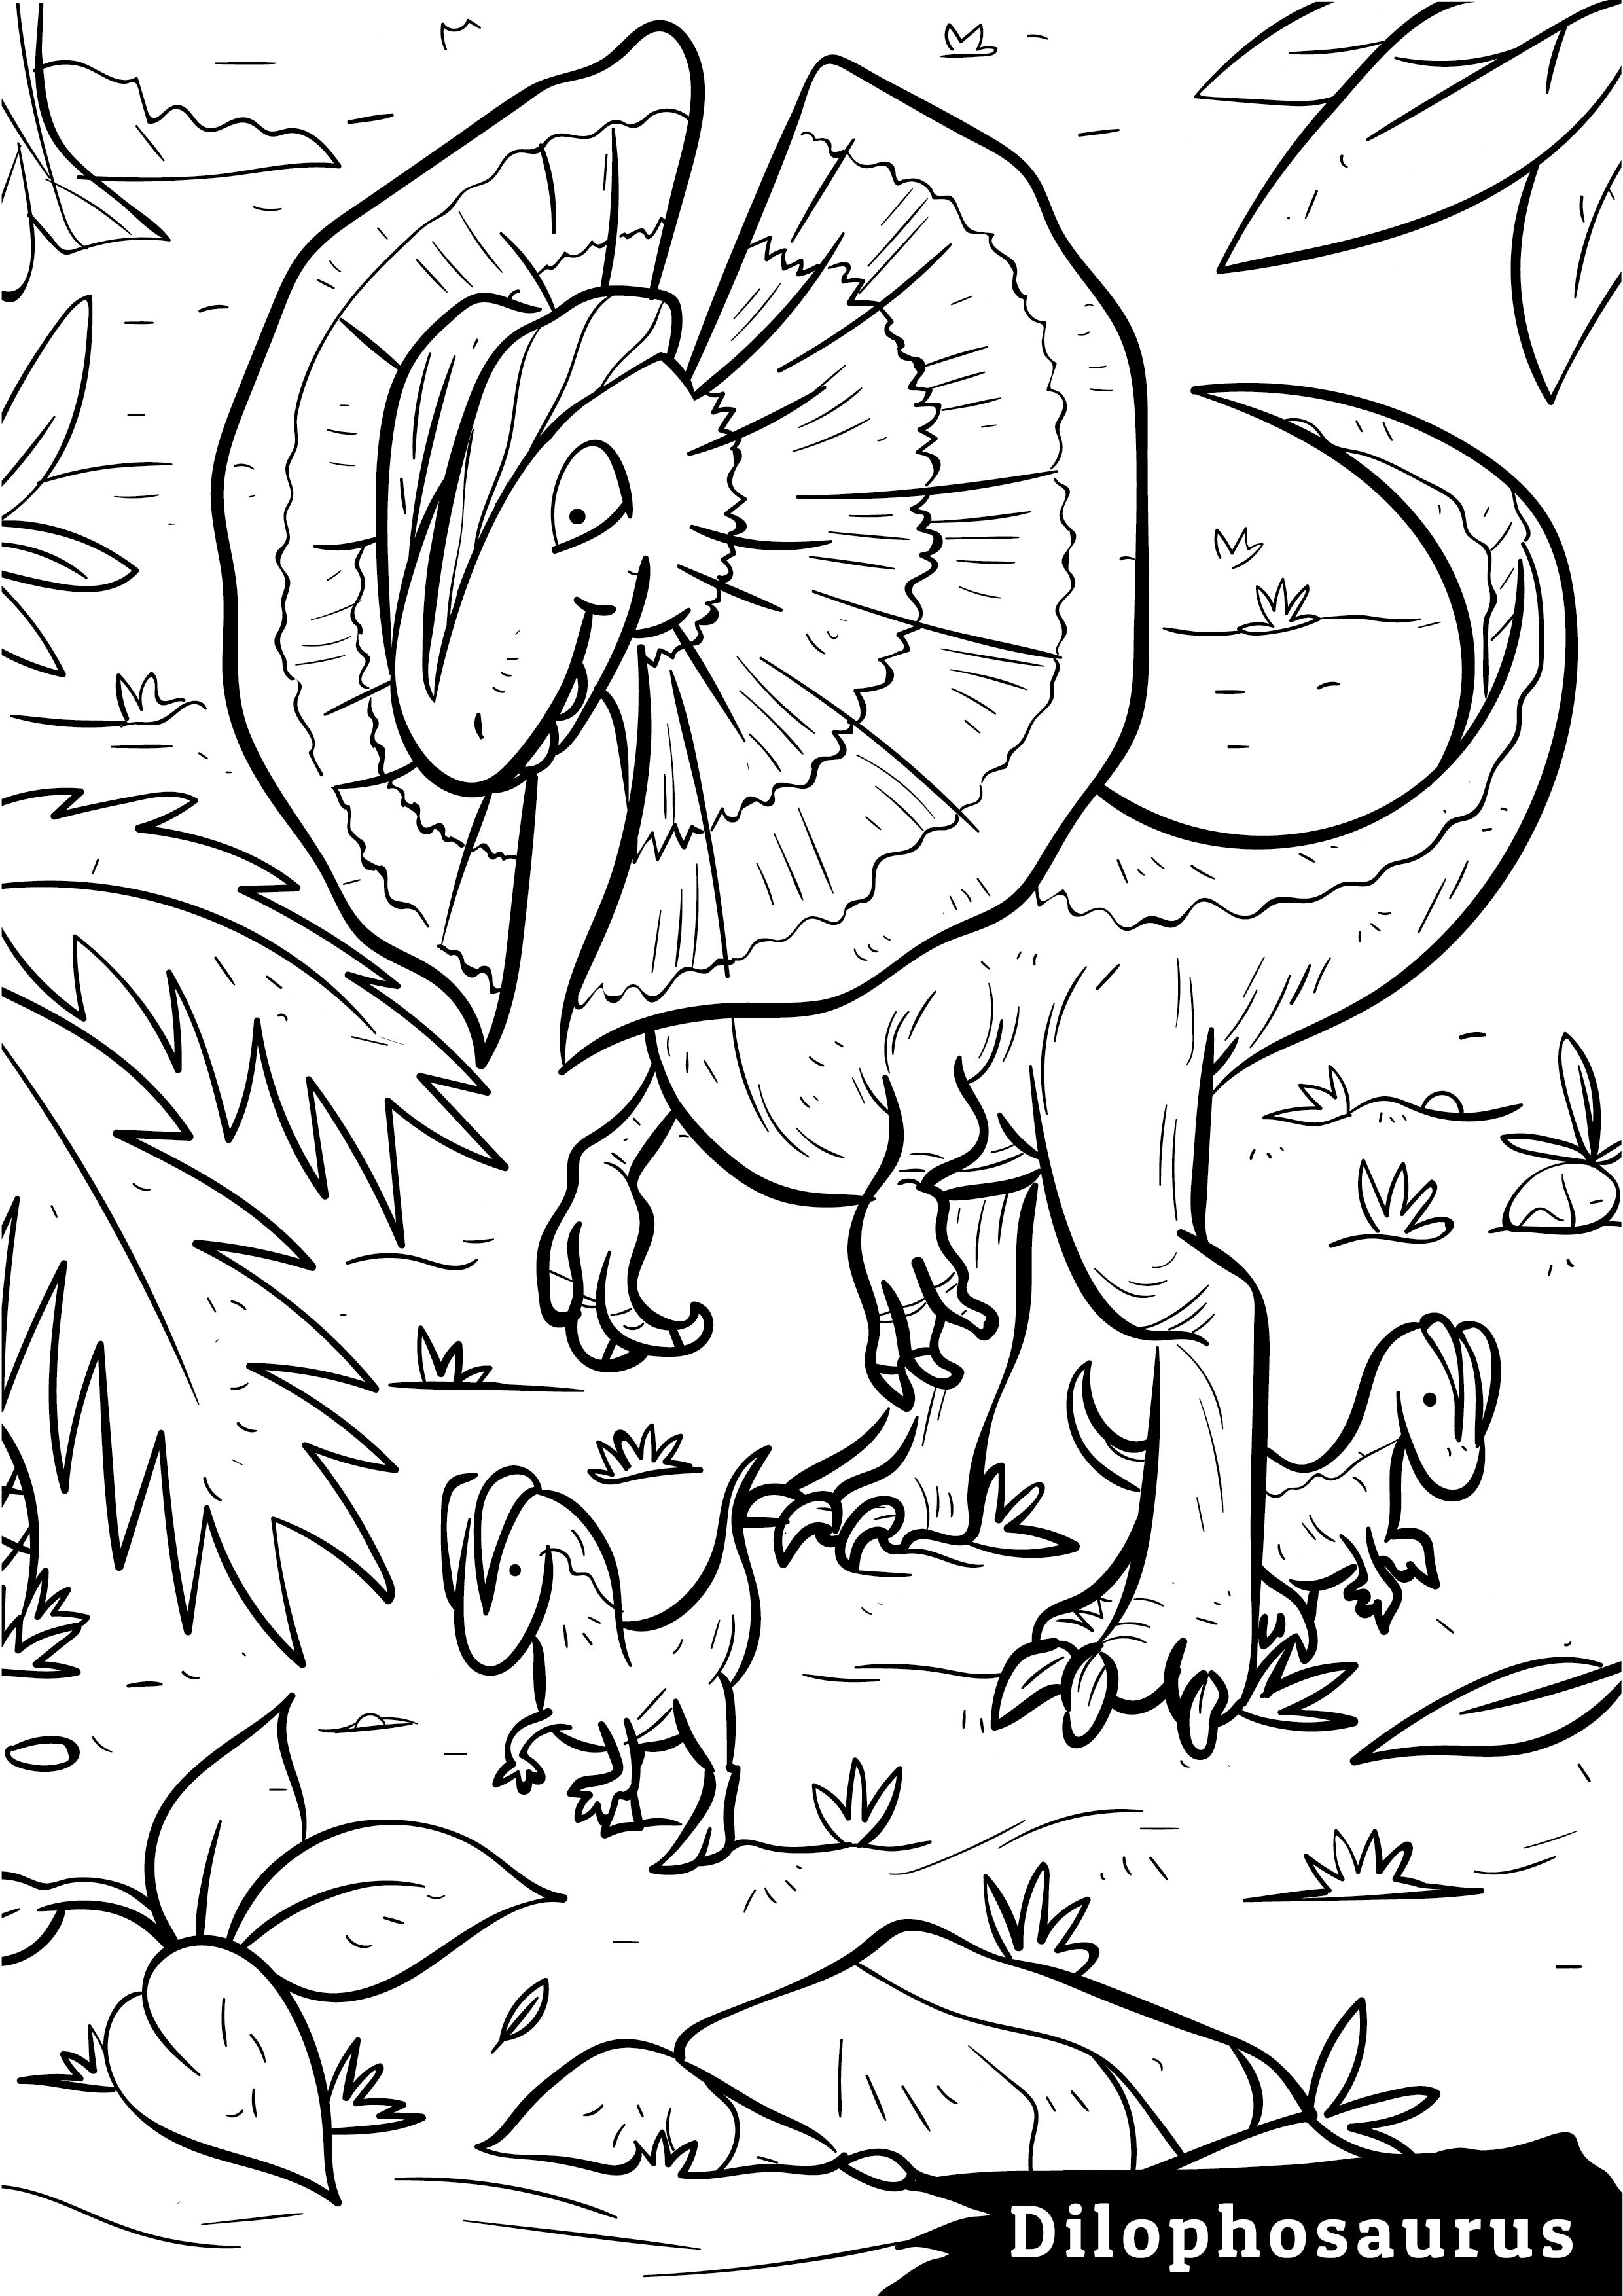 dilophosaurus coloring pages to print